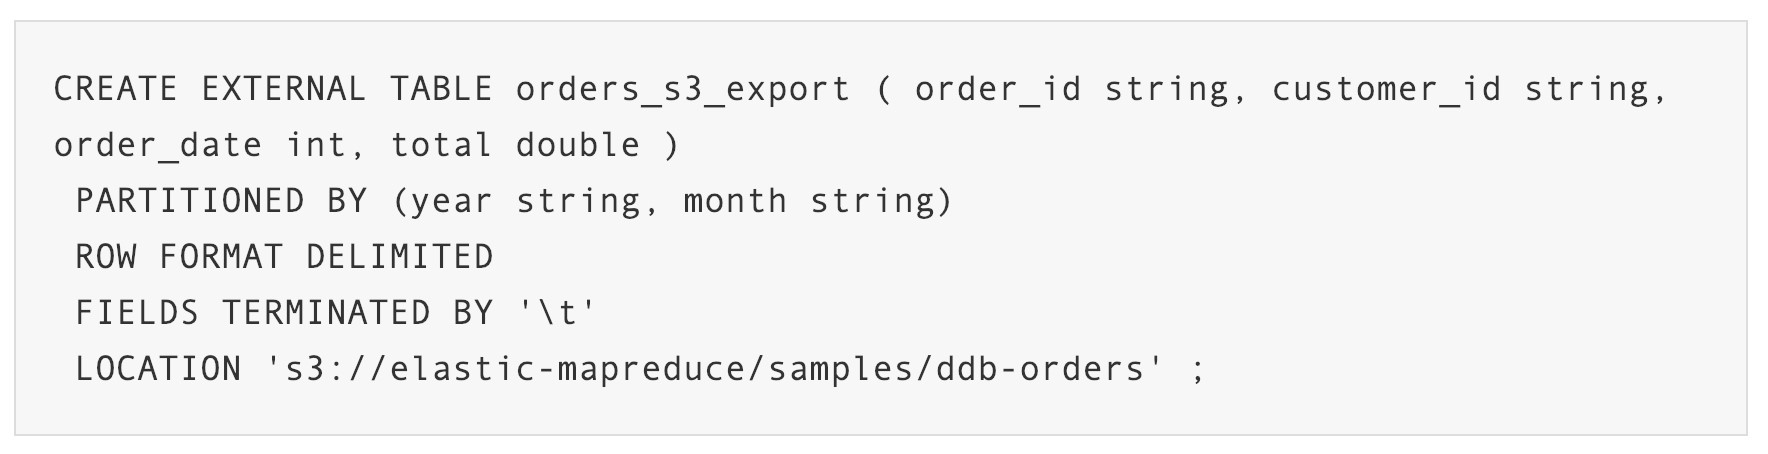 CREATE EXTERNAL TABLE orders_s3_export ( order_id string, customer_id string,
order_date int, total double )

PARTITIONED BY (year string, month string)

ROW FORMAT DELIMITED

FIELDS TERMINATED BY '\t'

LOCATION 's3://elastic-mapreduce/samples/ddb-orders'